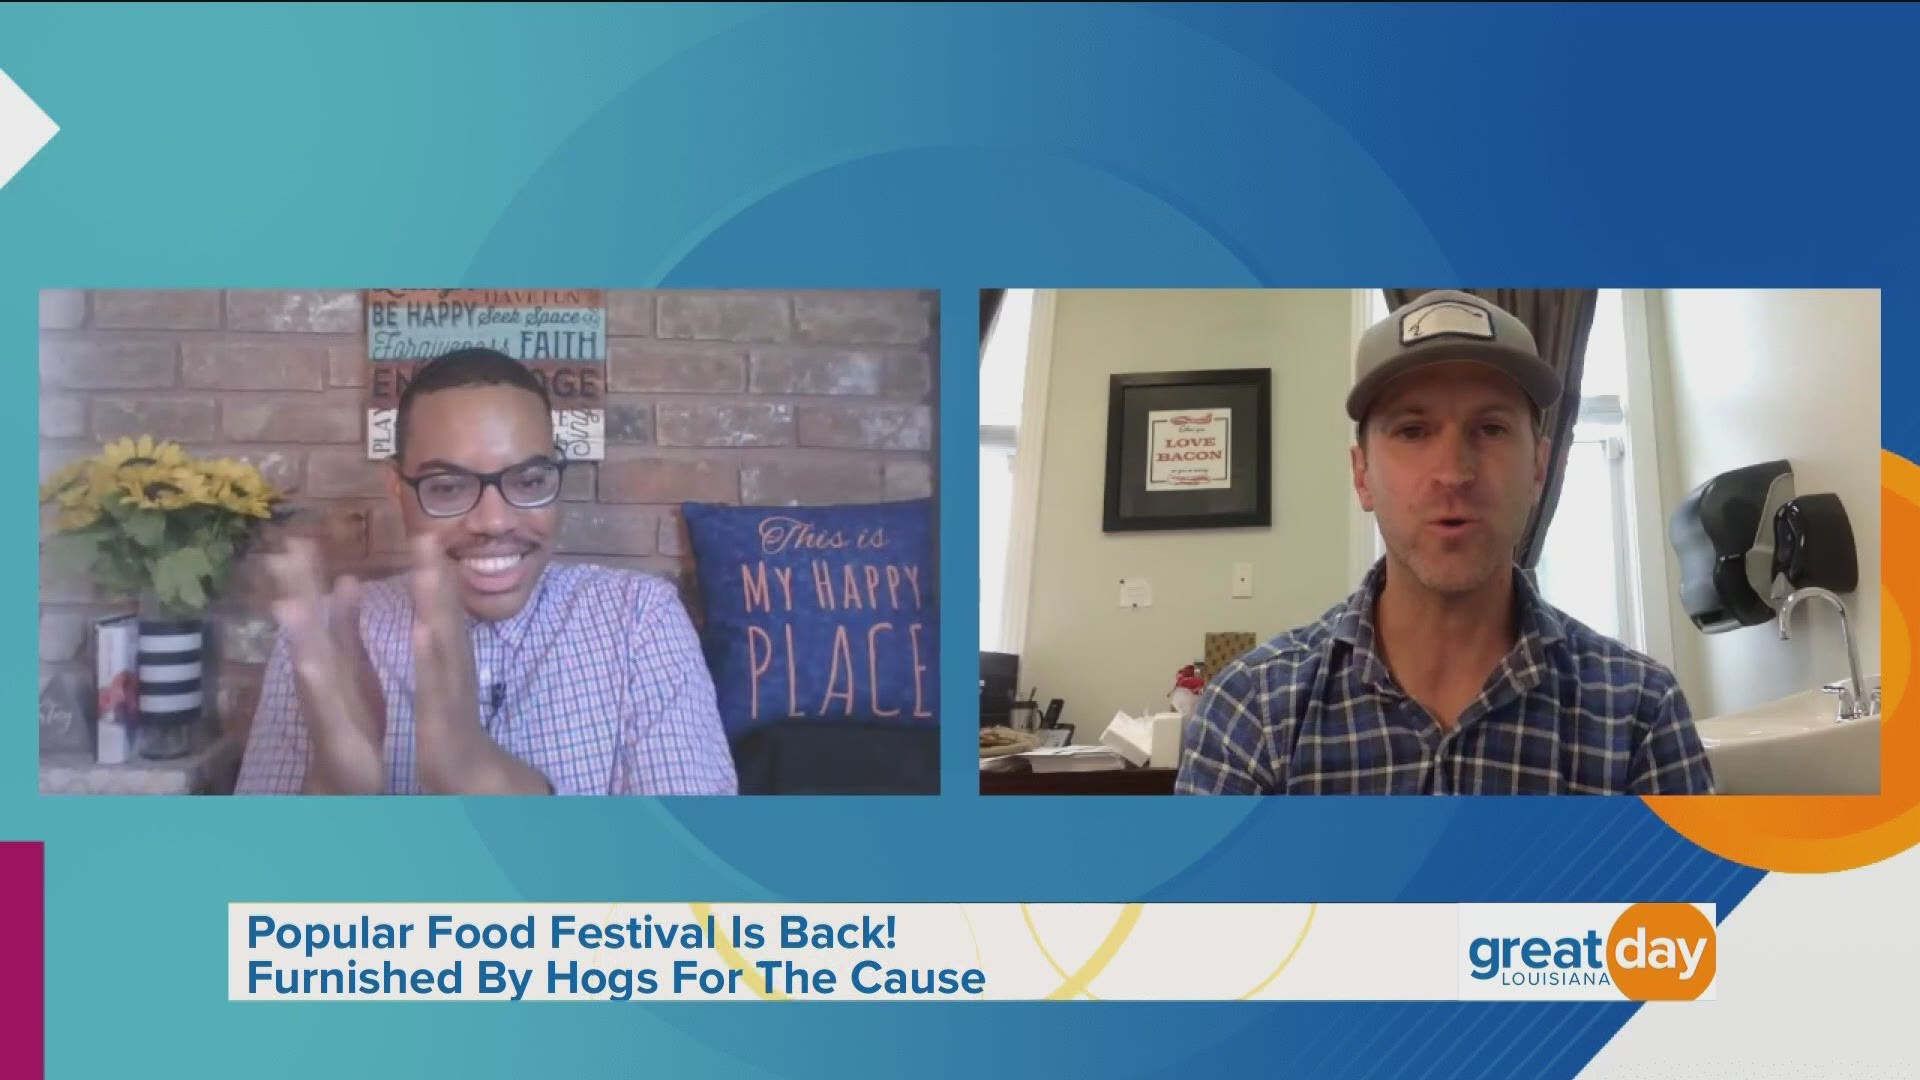 The co-founder of "Hogs For The Cause" discussed details about the 2021 festival.